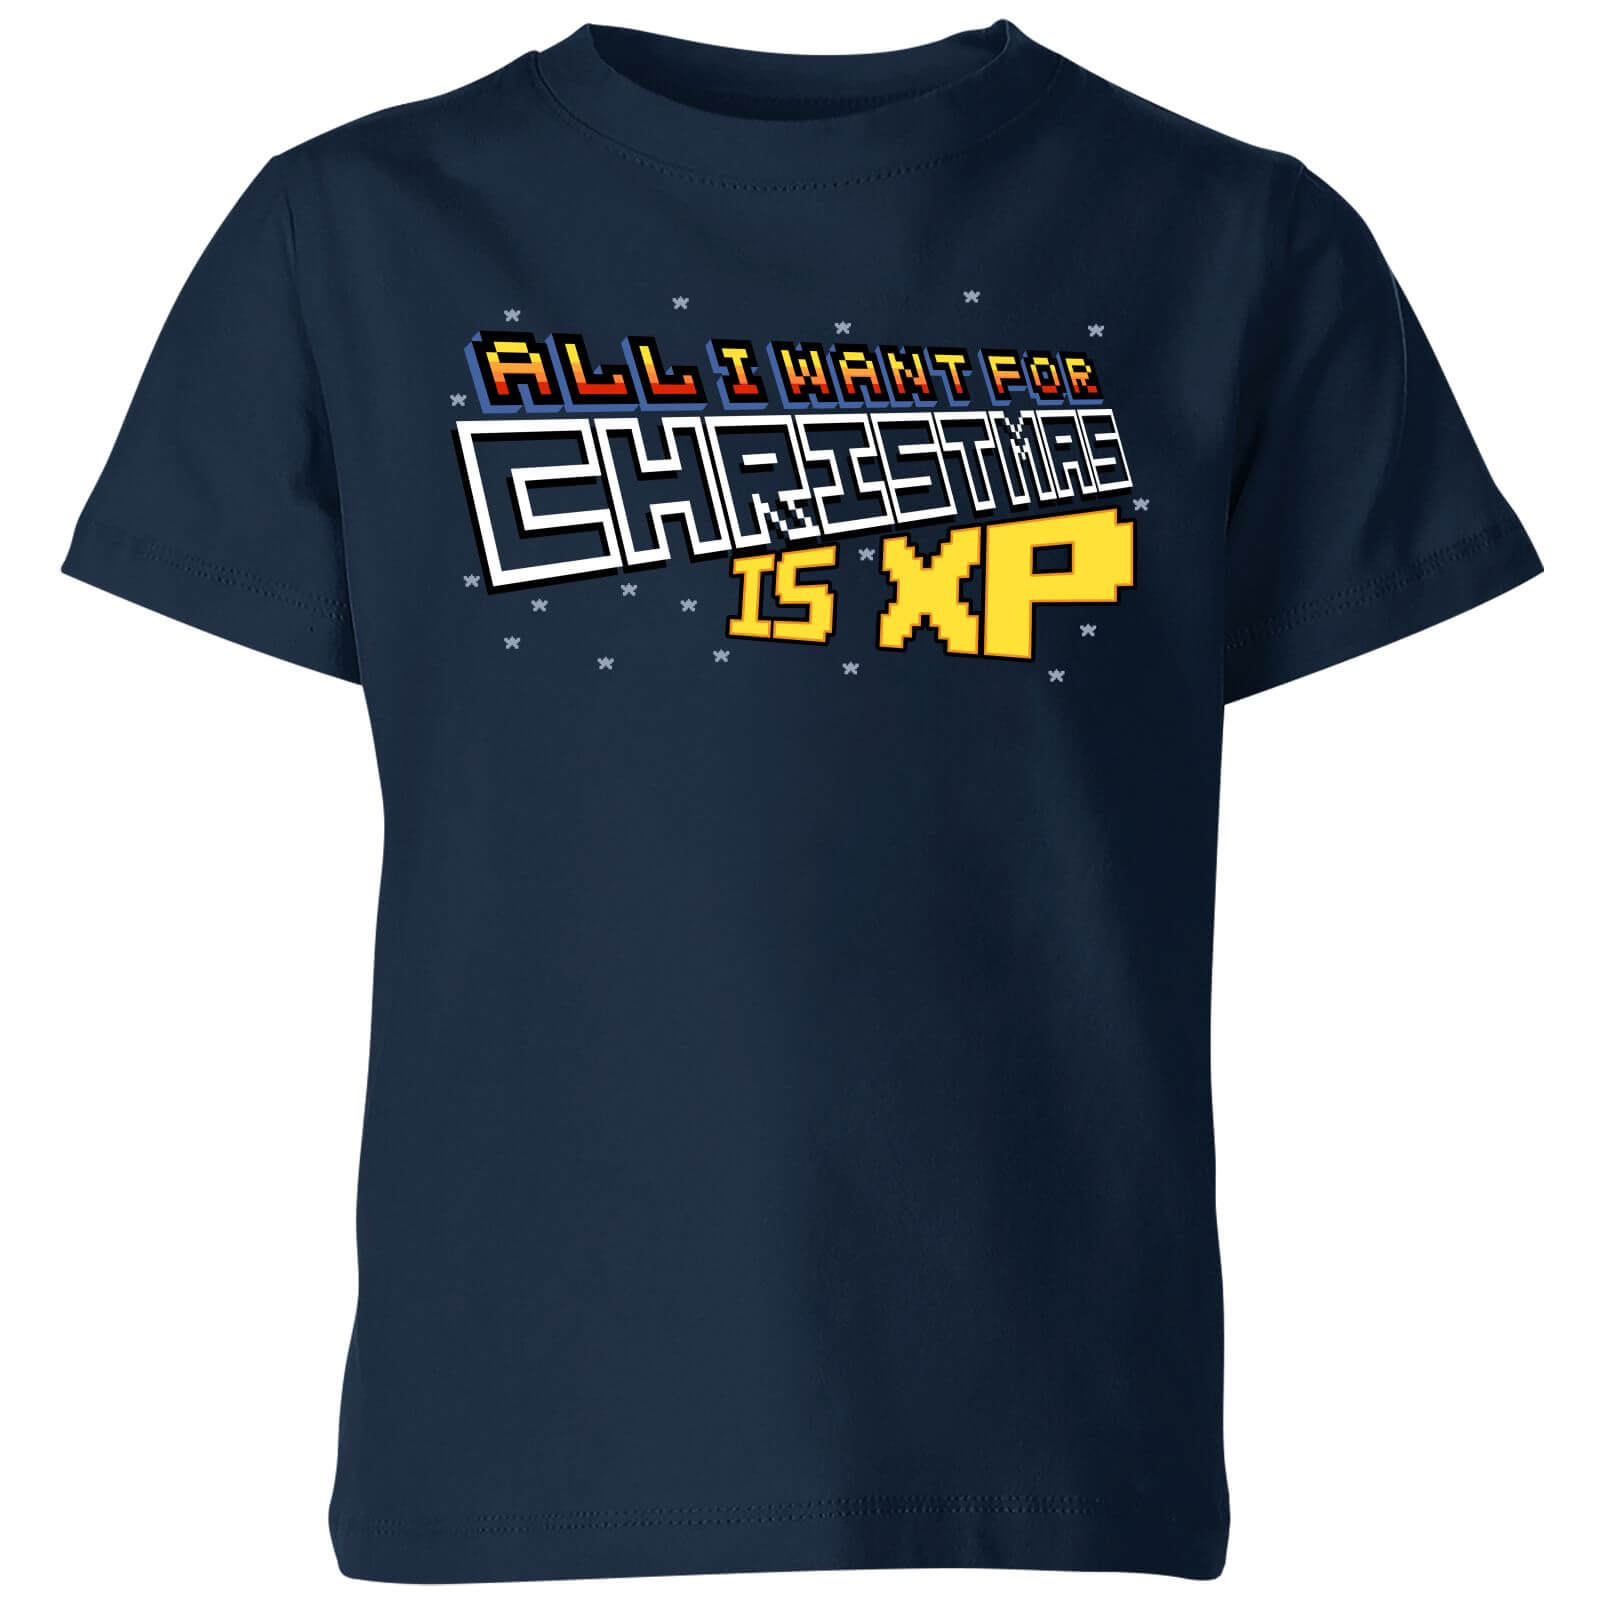 All I Want For Xmas Is XP Kids' T-Shirt - Navy - 3-4 Years - Navy